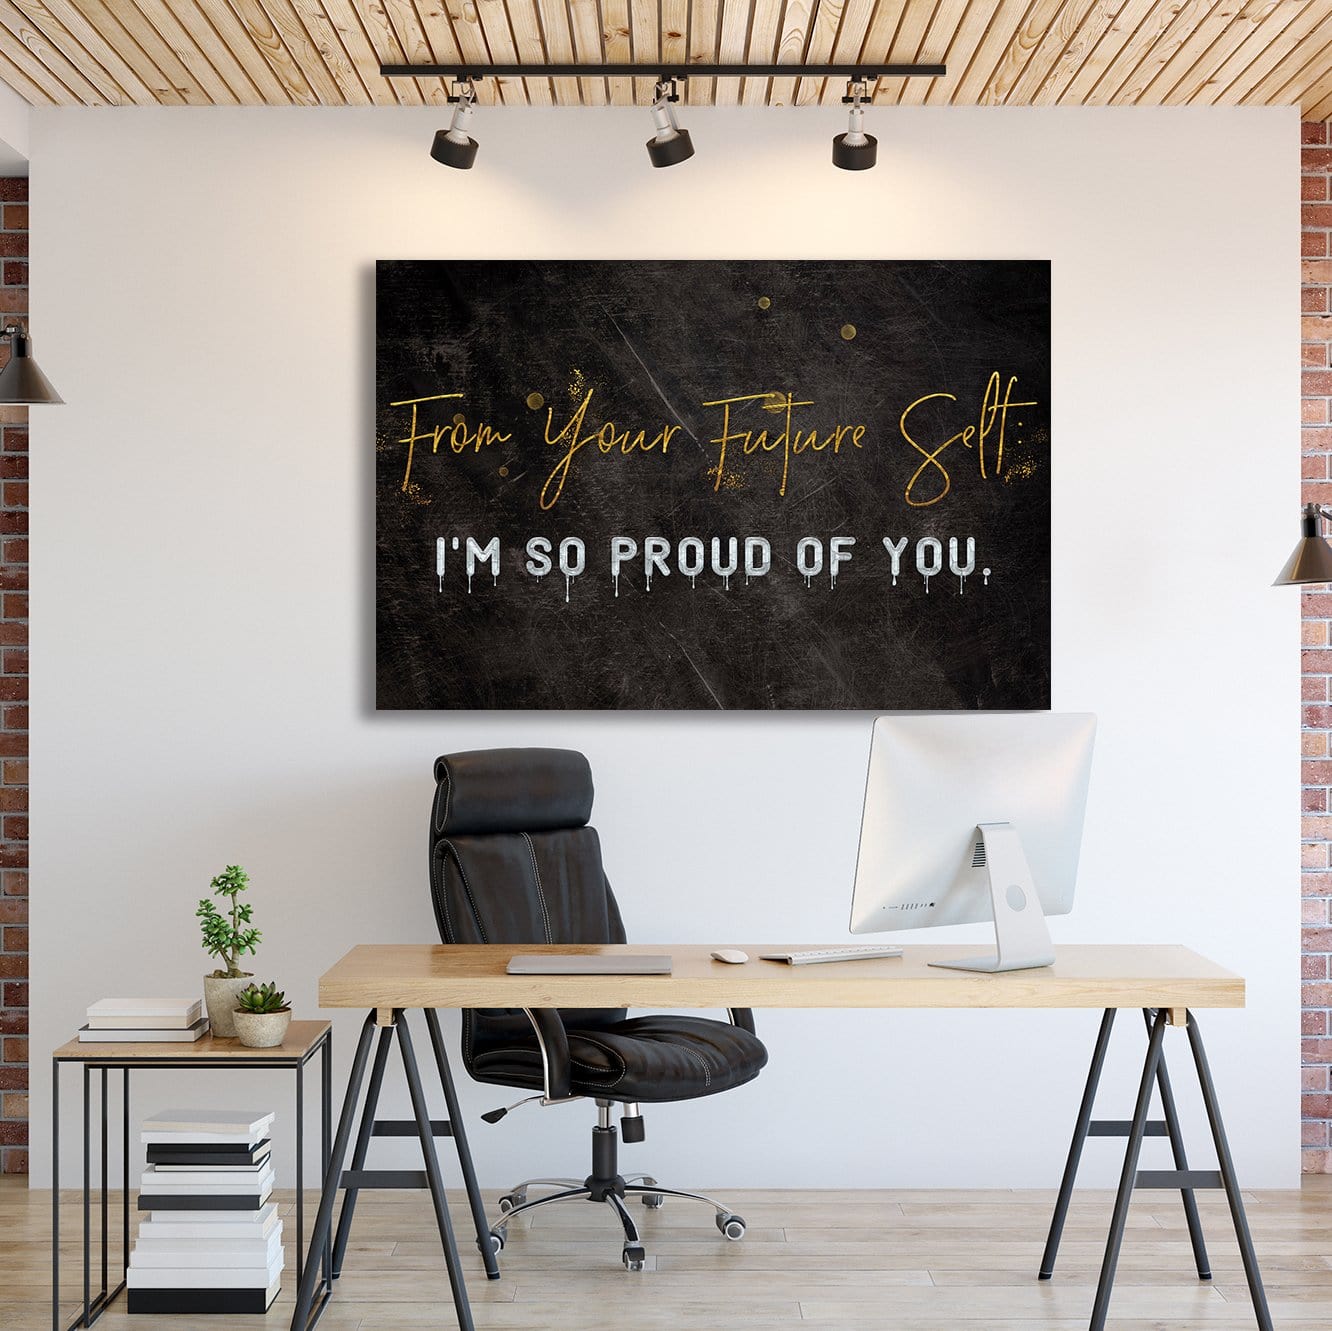 From Your Future Self Wall Art | Inspirational Wall Art Motivational Wall Art Quotes Office Art | ImpaktMaker Exclusive Canvas Art Landscape